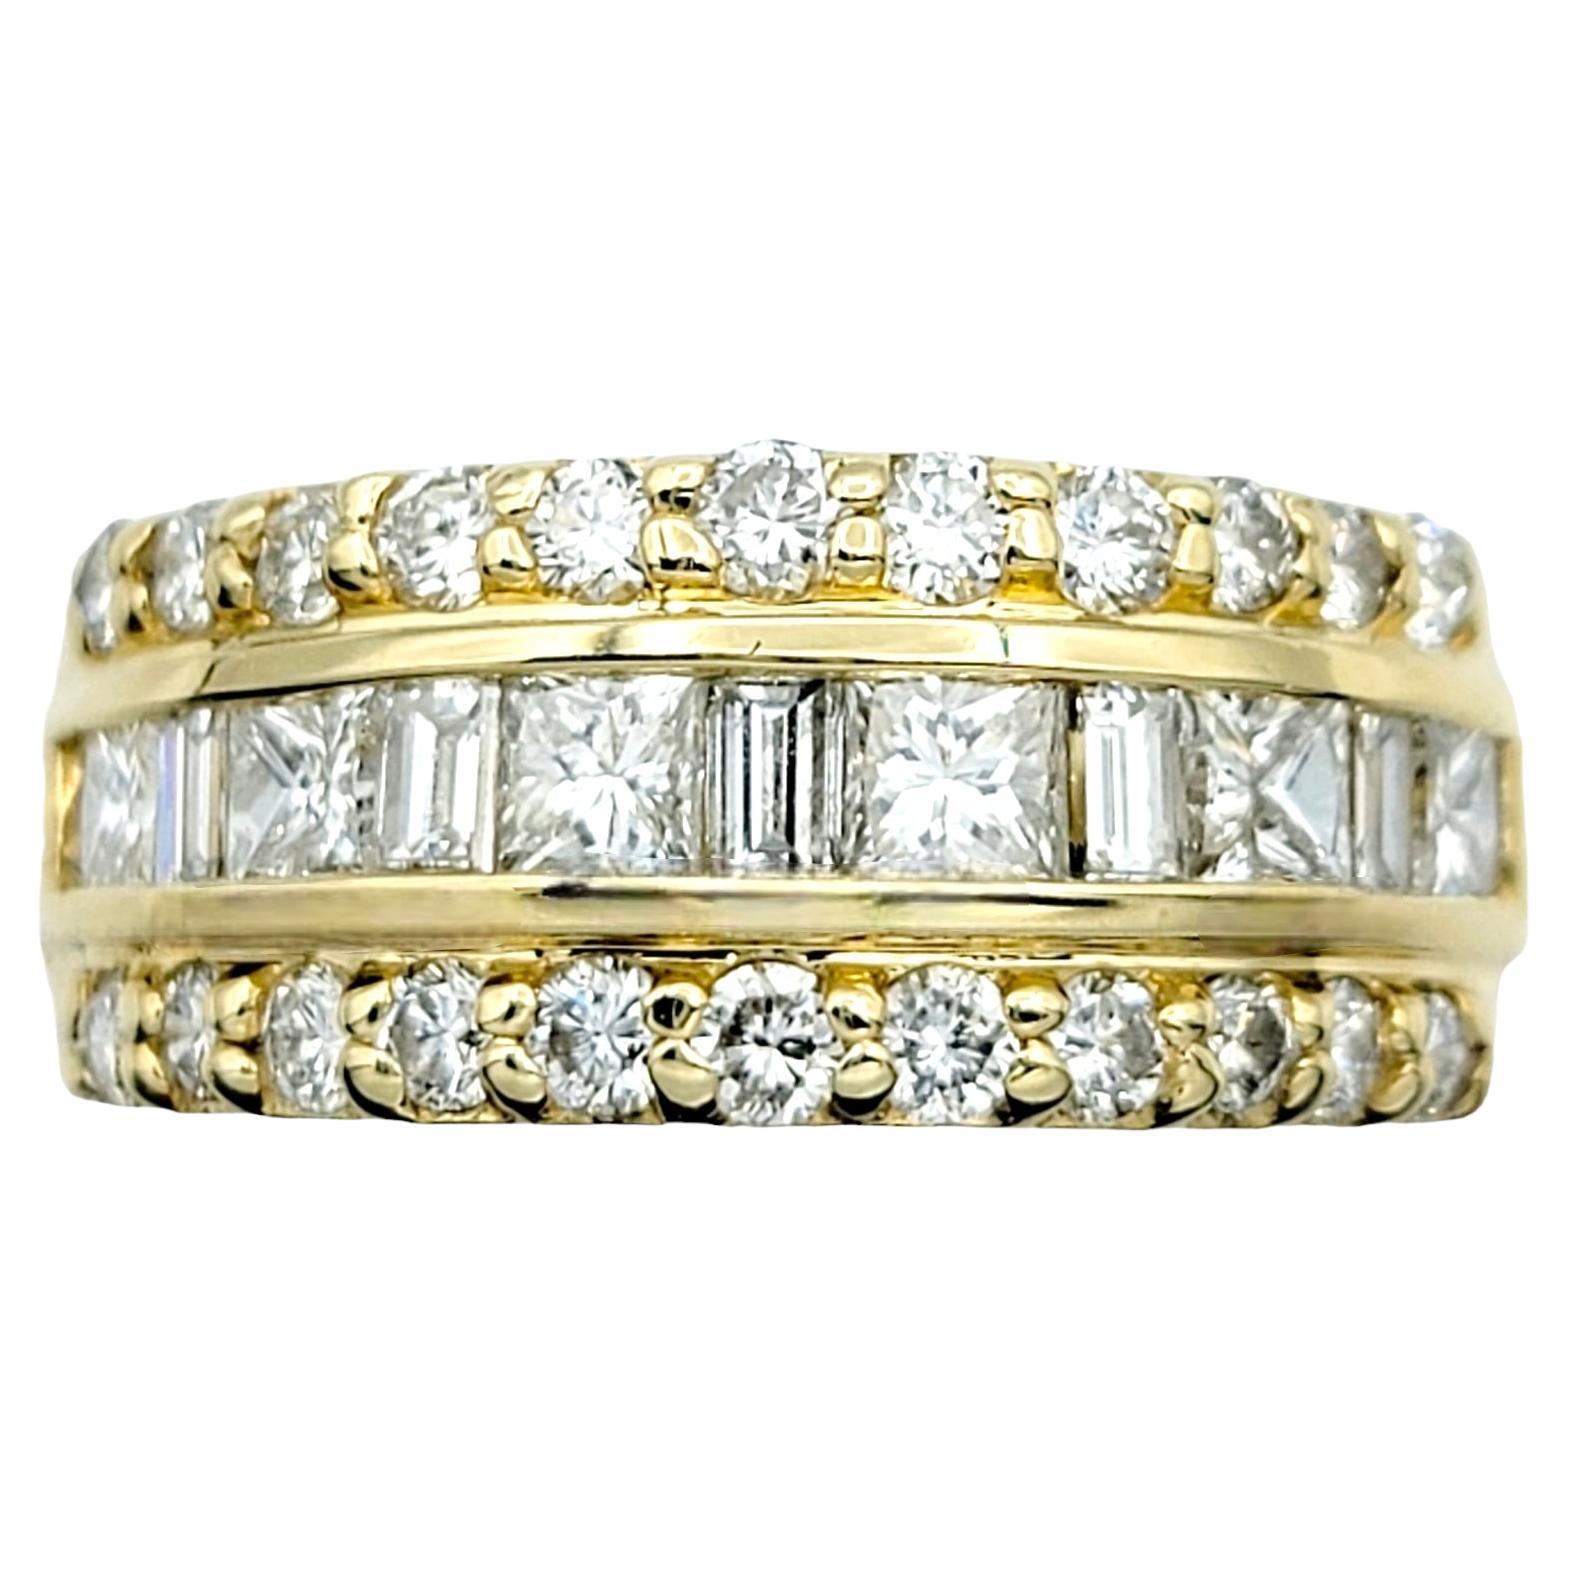 Ring size: 6.75

Absolutely gorgeous multi row diamond semi-eternity band ring. This remarkable ring features glittering rows of icy white diamonds that shimmer and shine from every angle, beautifully complimenting the warm yellow gold setting.